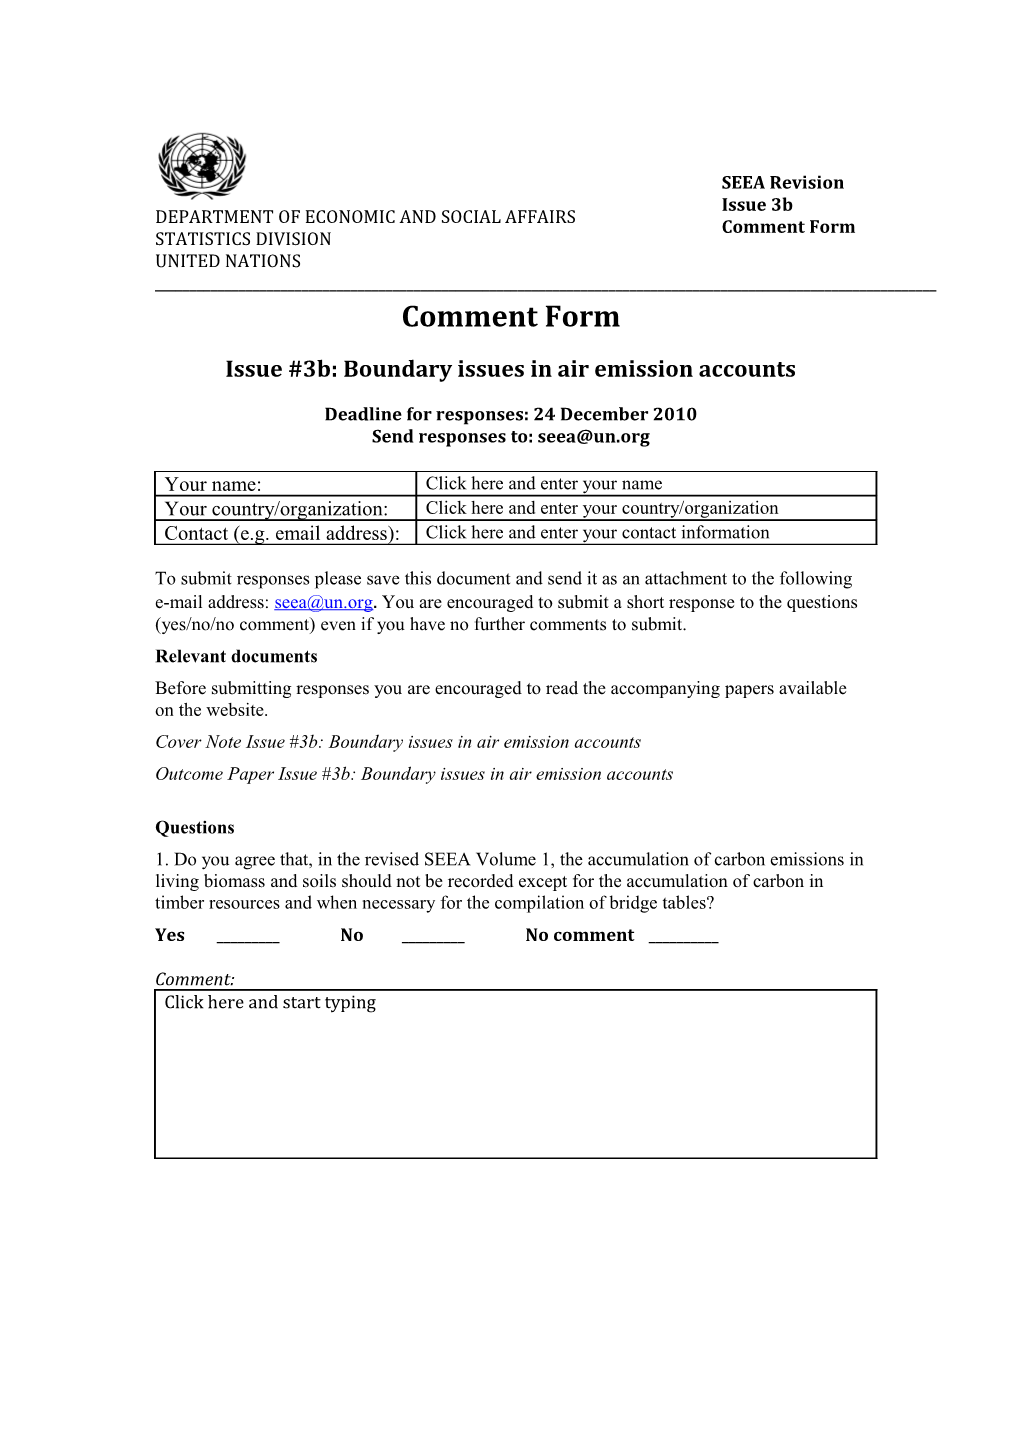 Issue #3B:Boundary Issues in Air Emission Accounts